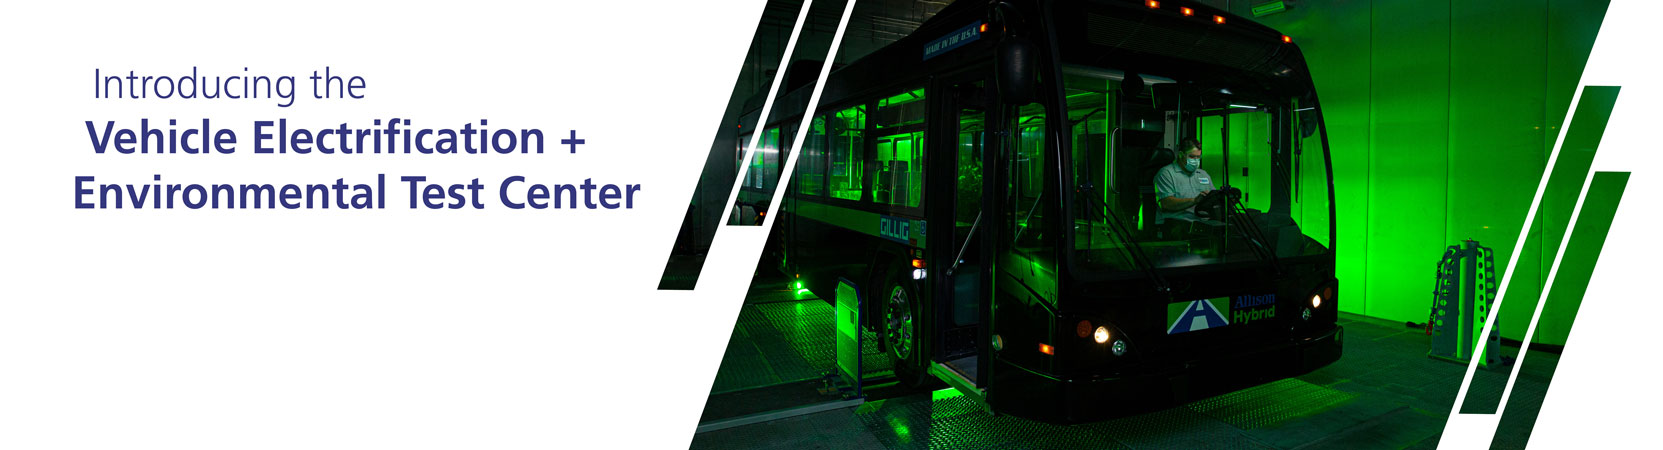 A black bus is shown on a dyne with green lights all around it. Text reads "Introducing Vehicle Electrification + Environmental Test Center"